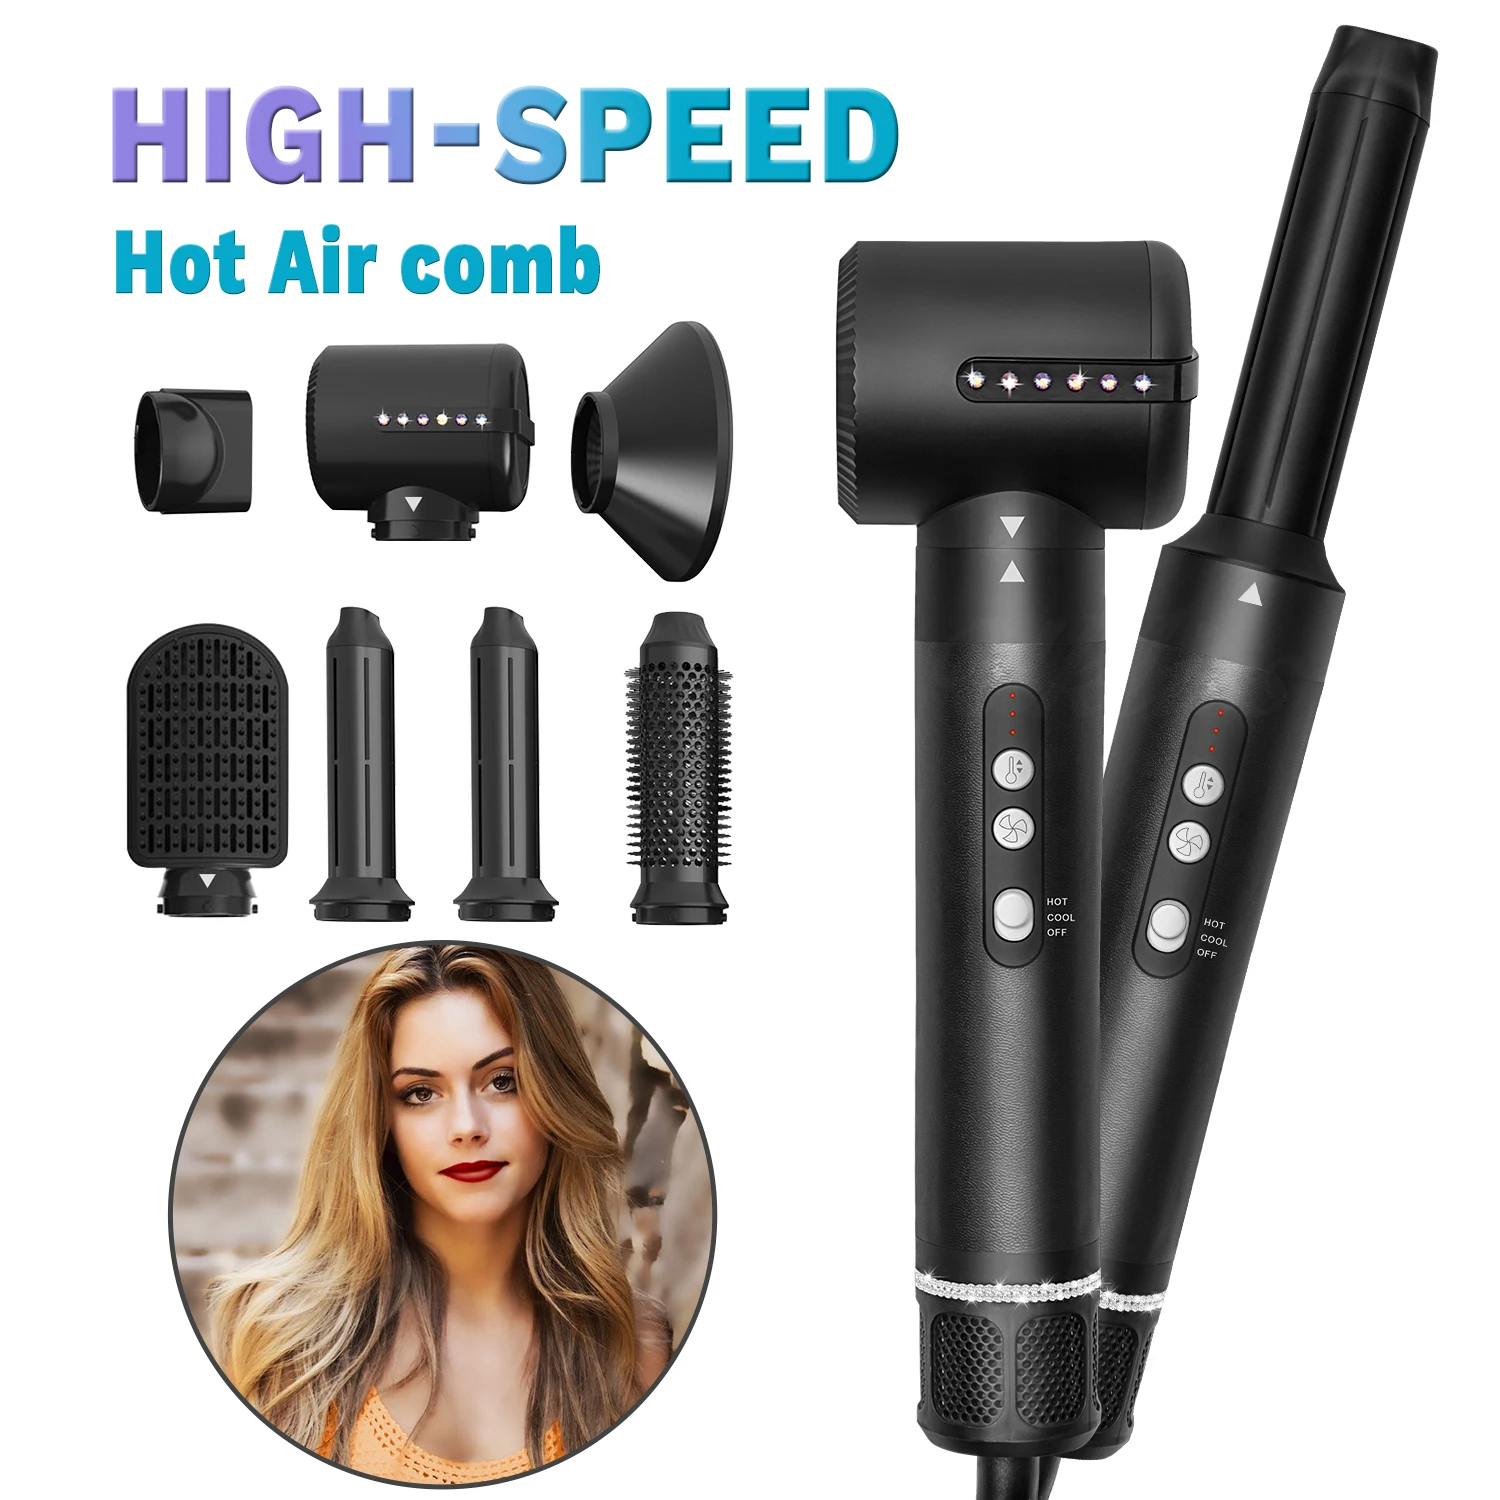 

High Speed Hair Dryer Brushless Blow Dryer Comb 7 In 1 Hair Blower Brush Negative Ionic Hair Curler Air Styling Curling Iron